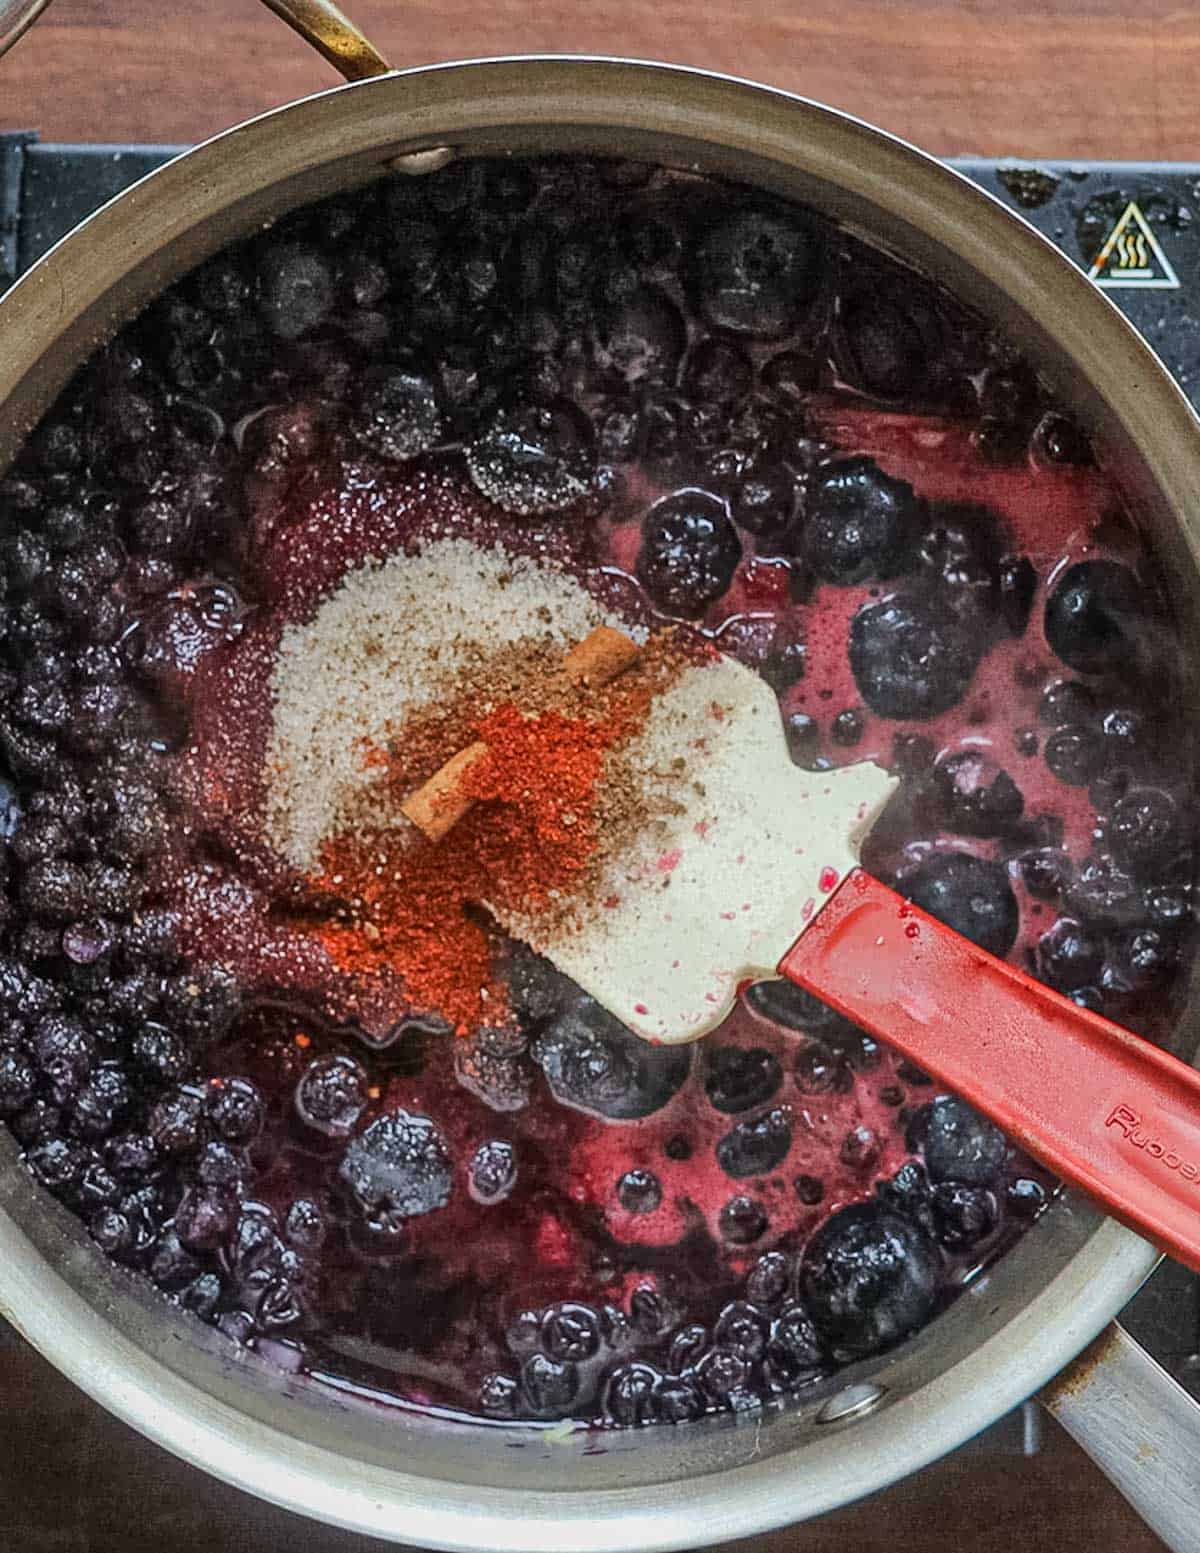 Adding ground cayenne pepper to a pan of blueberries cooking on the stove.